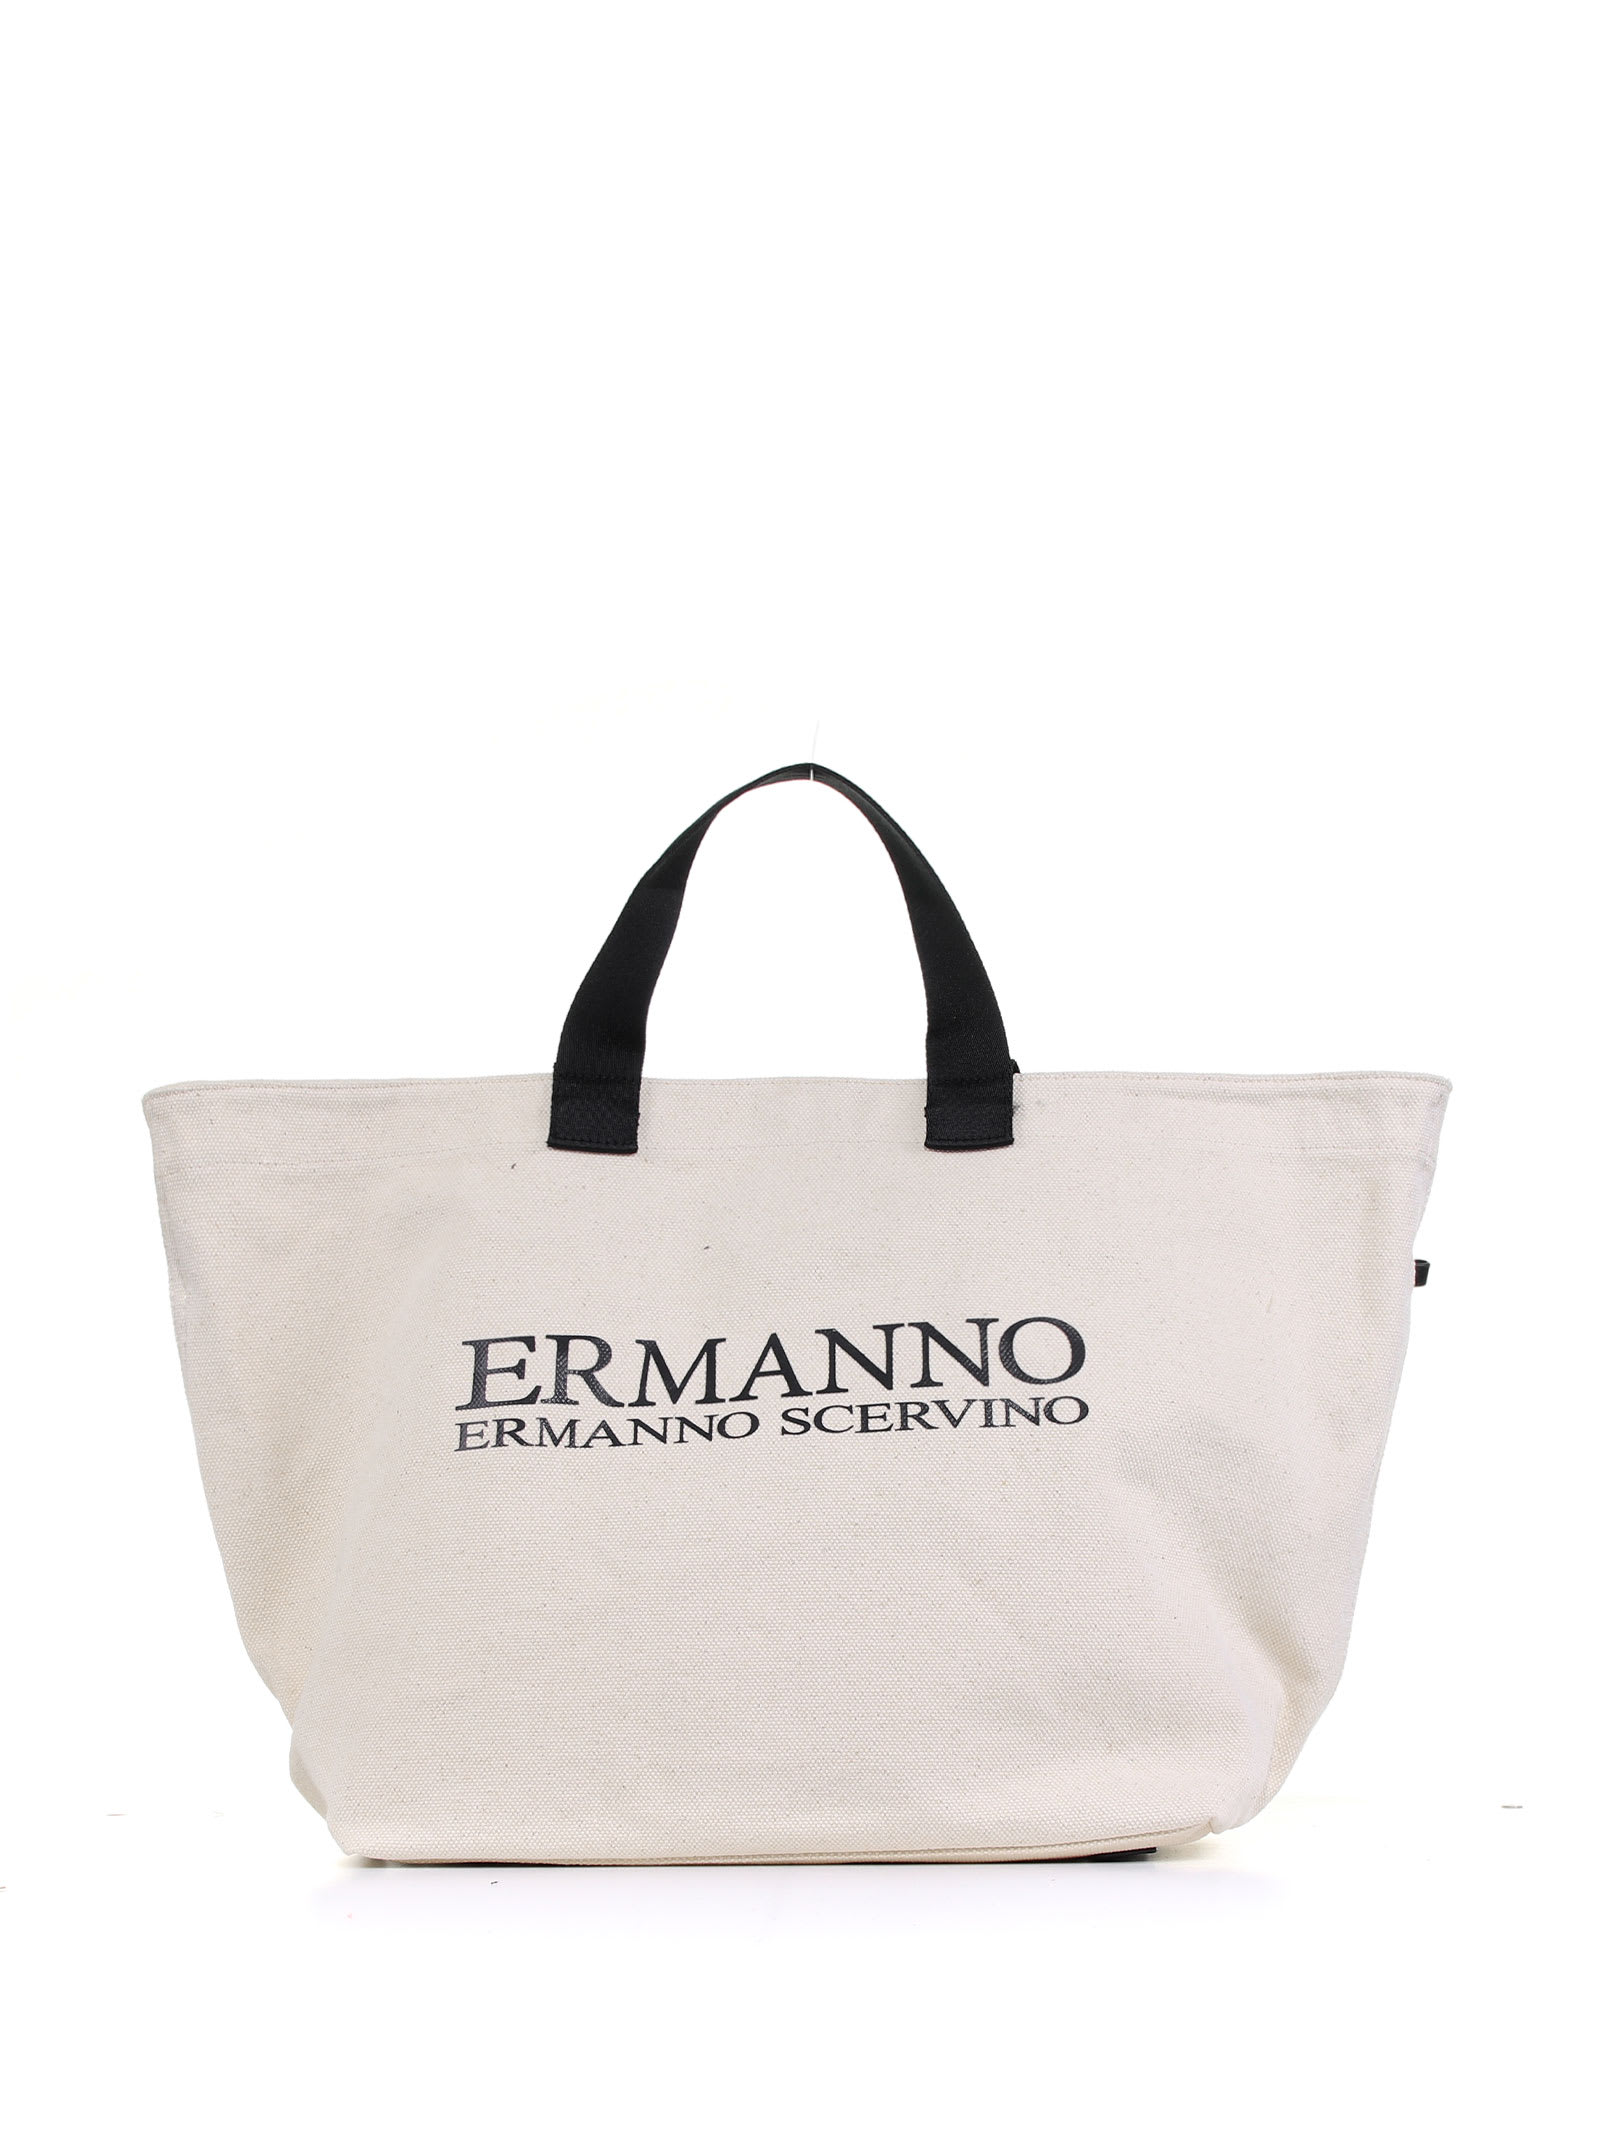 Ermanno Scervino Shopping Mary